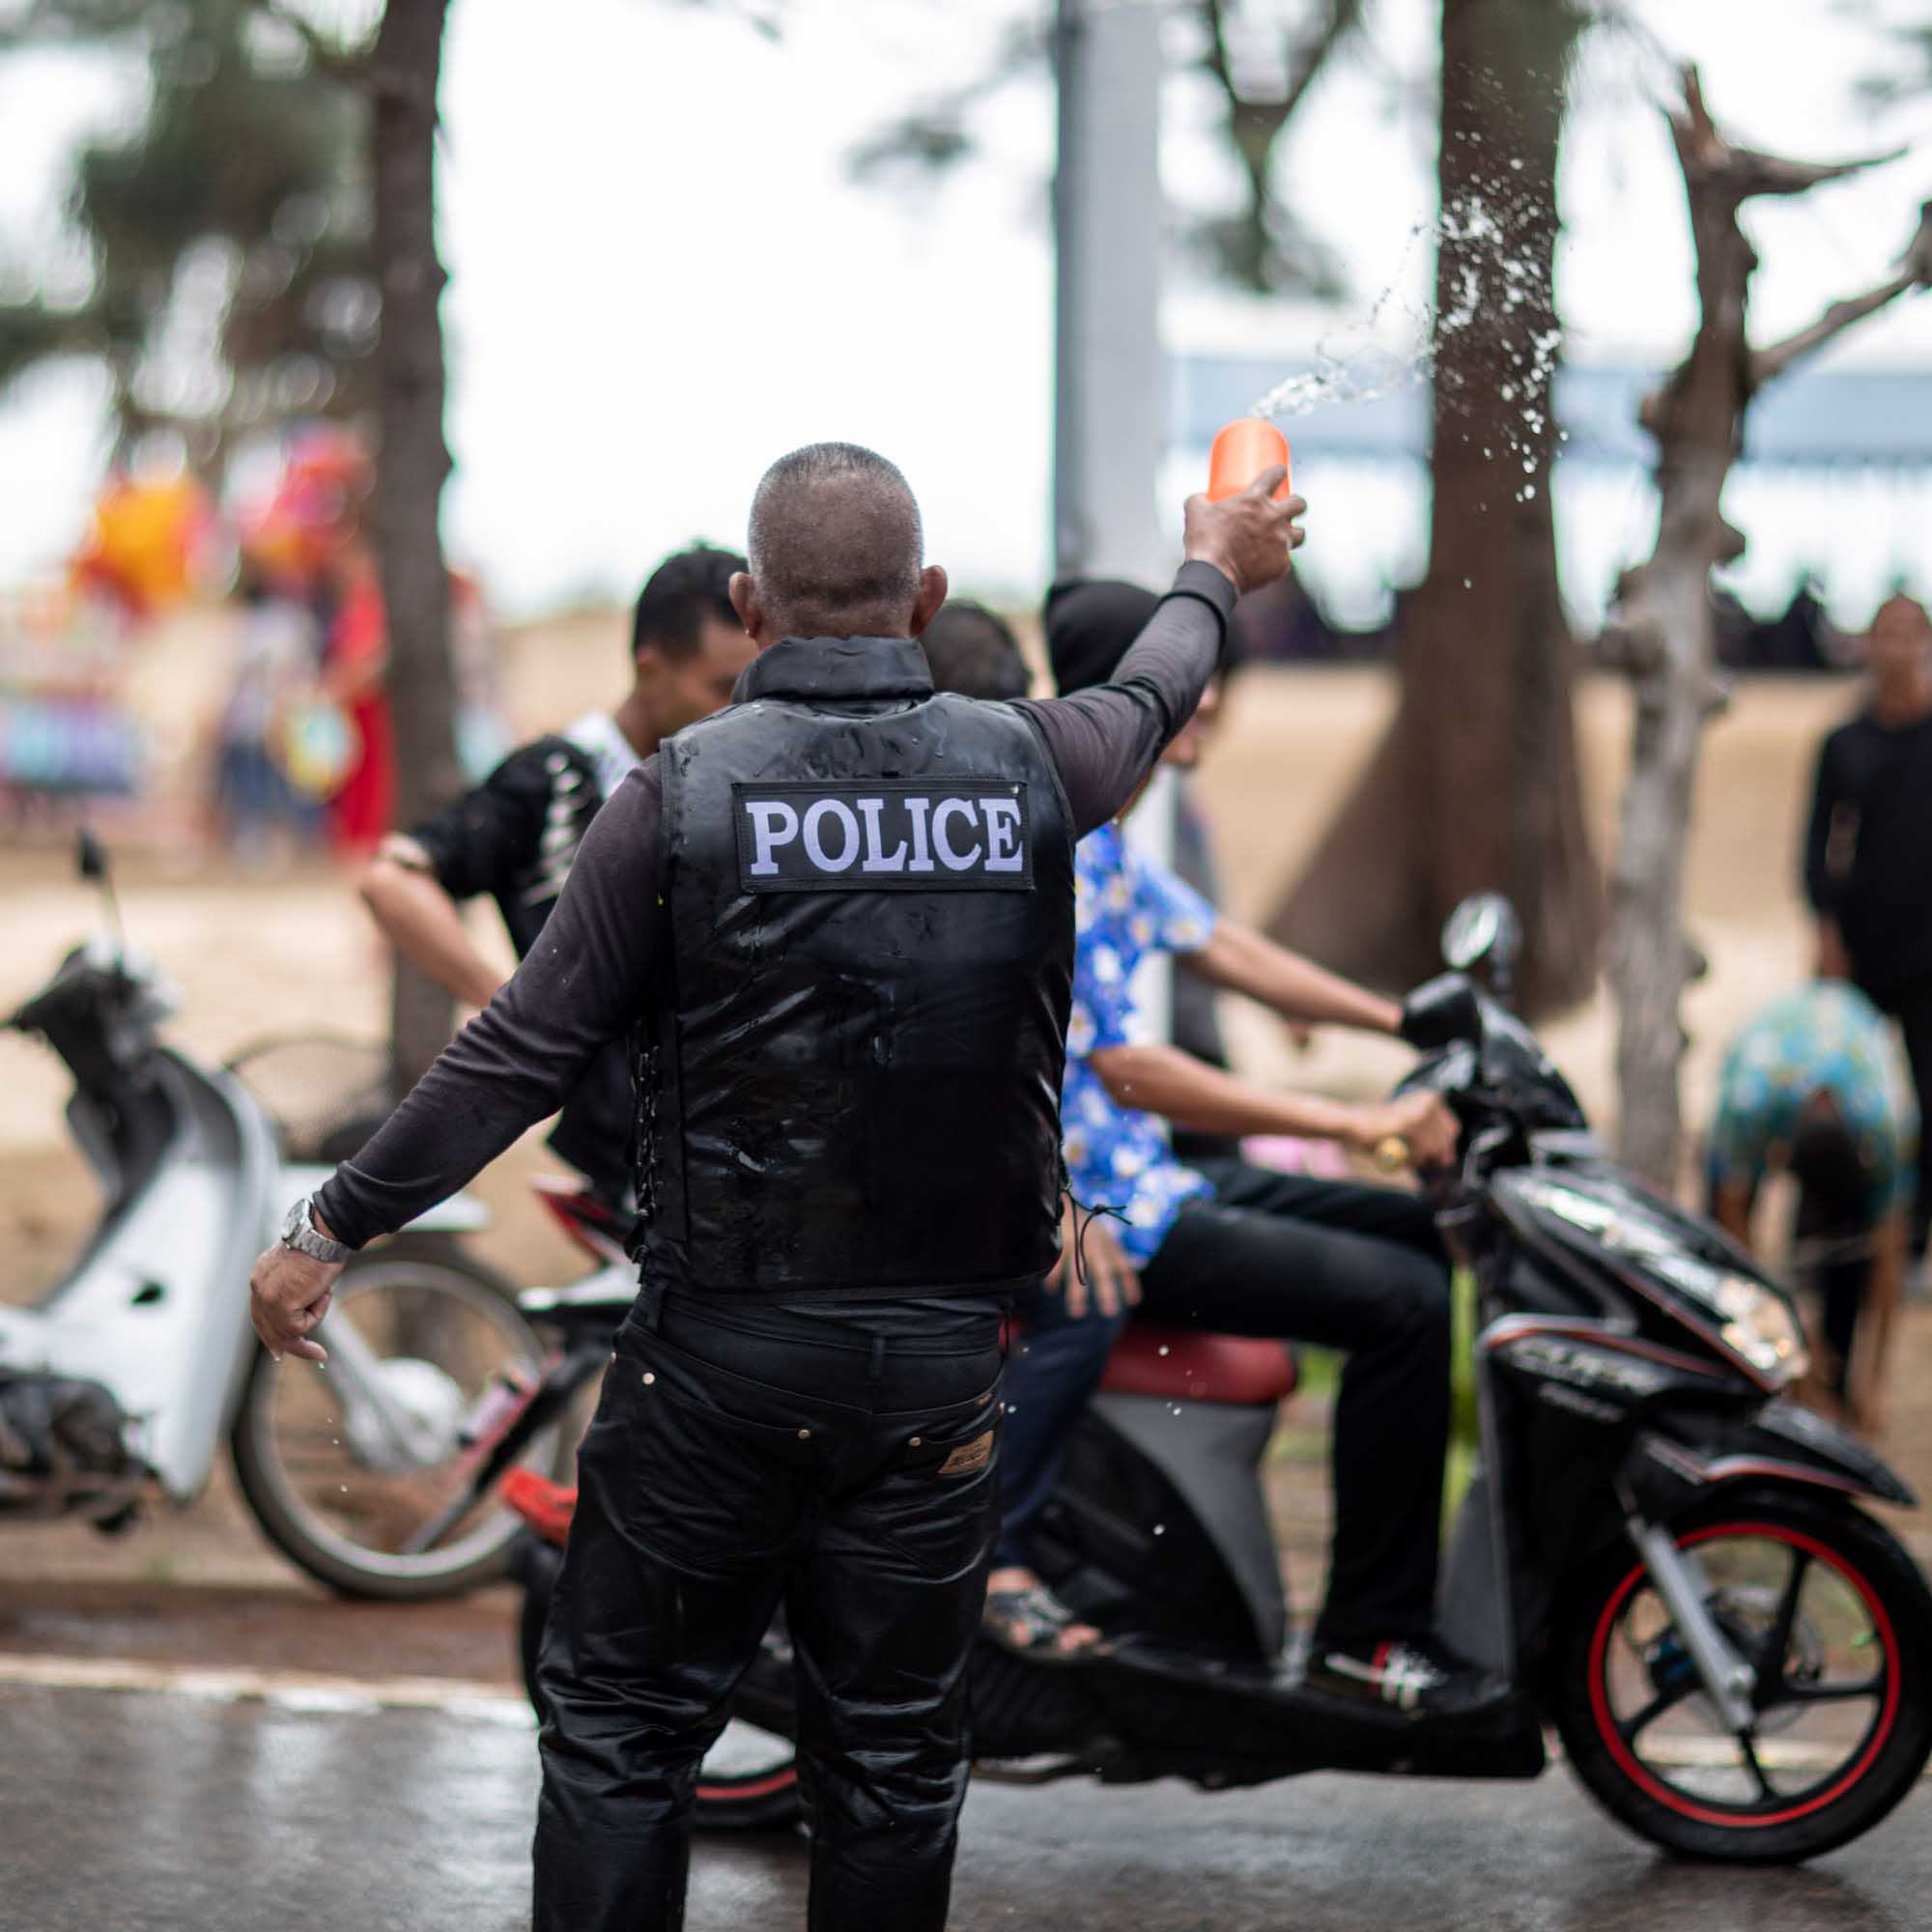 Police officer throws water at boys on motorbike during Songkran water festival in Phuket, Thailand | Street Photography | Travel Photography | Festival Photography